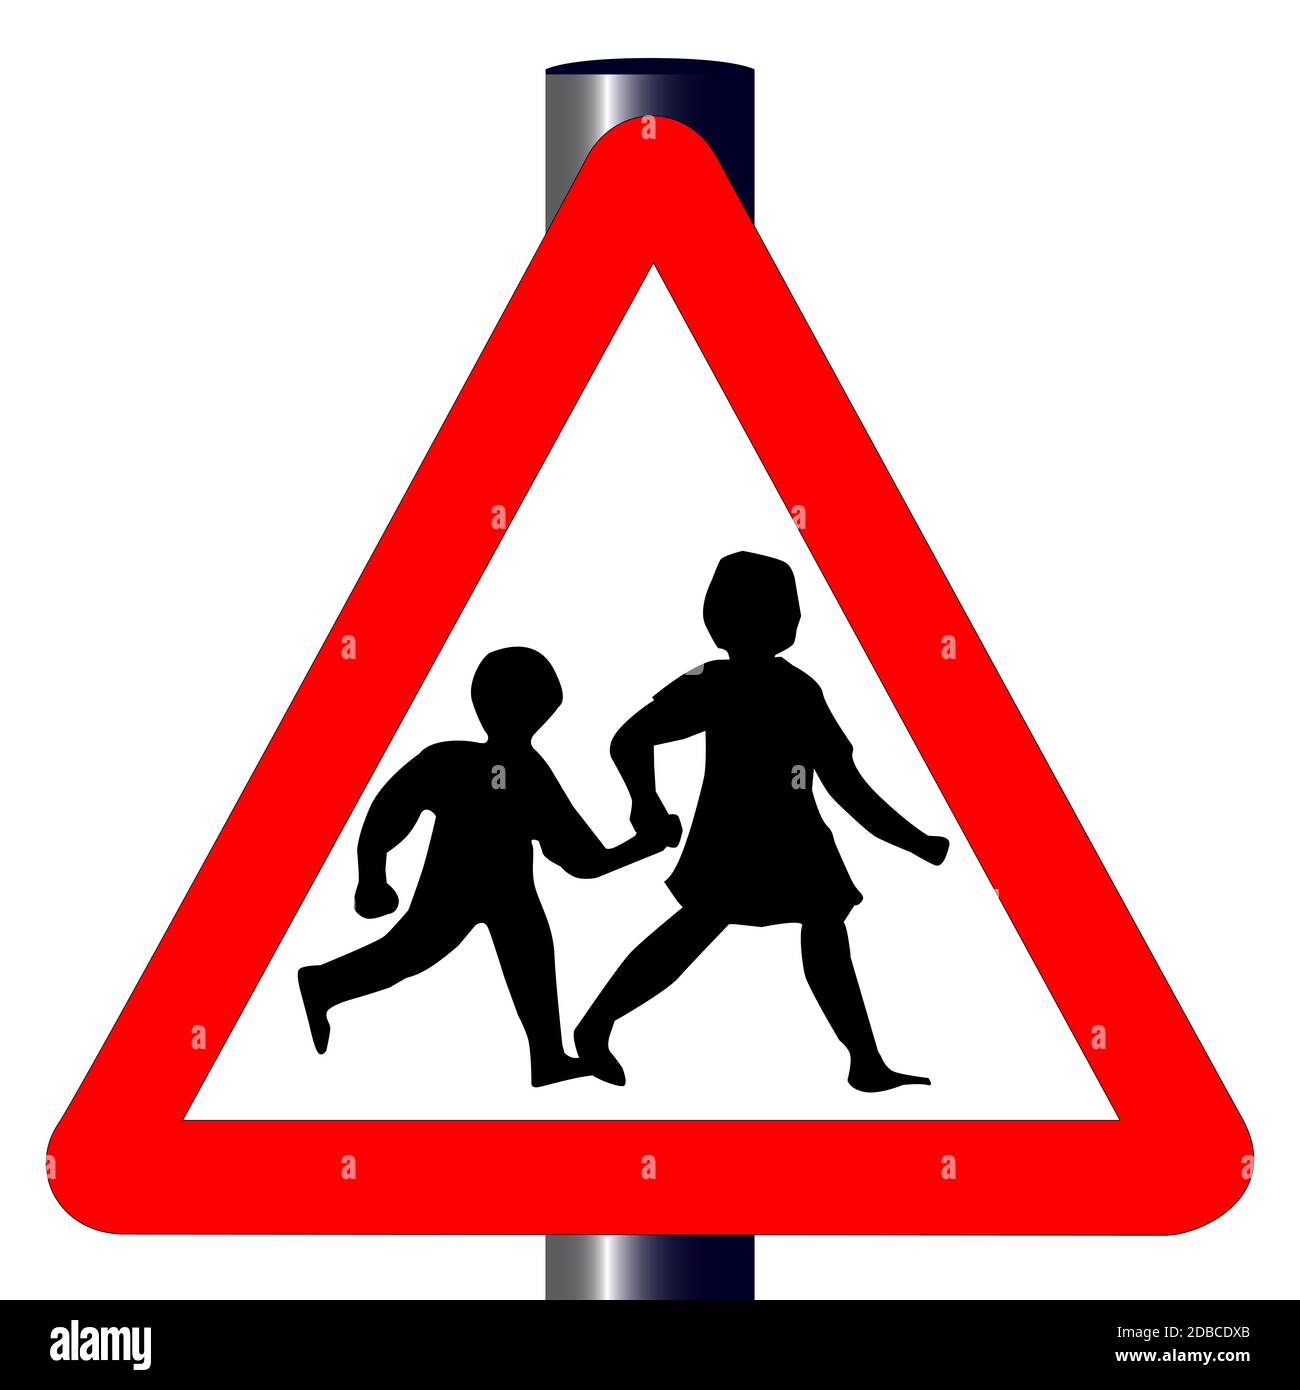 The traditional 'children' traffic sign isolated on a white background.. Stock Photo